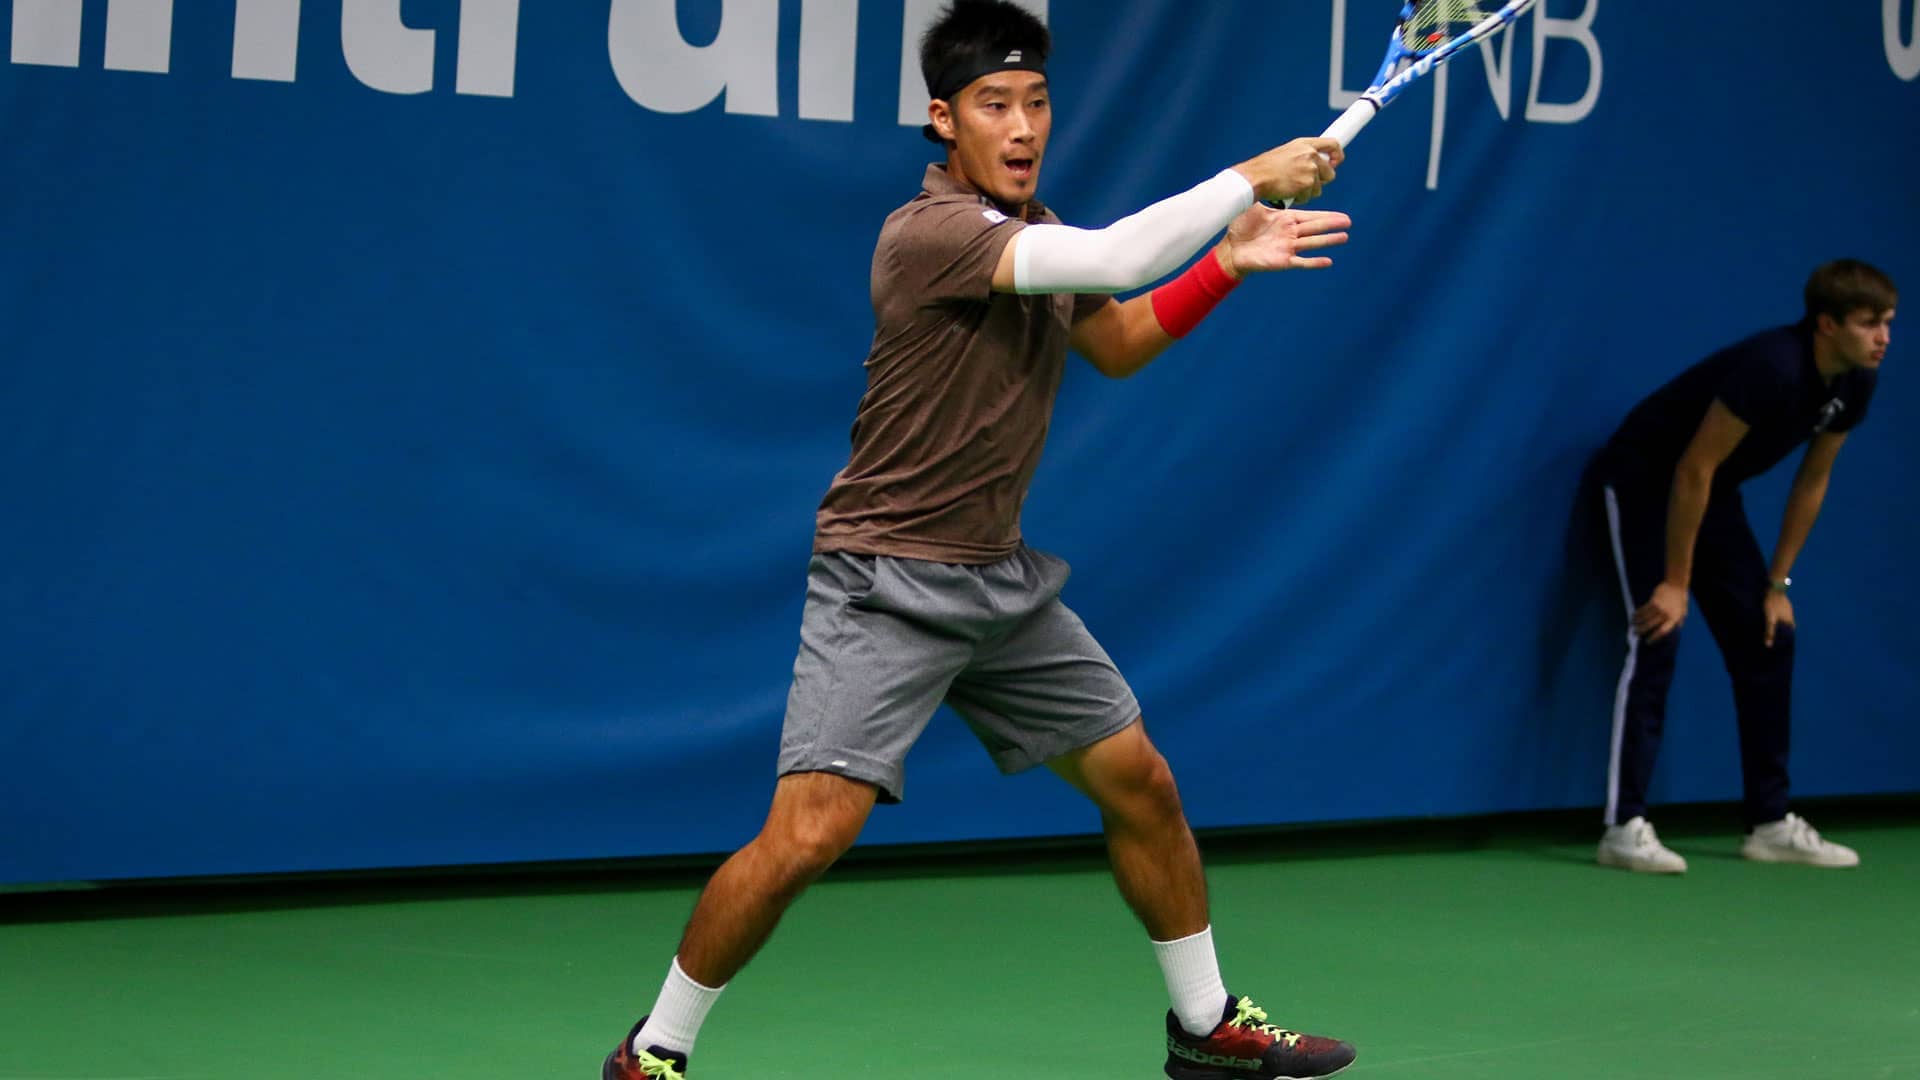 <a href='https://www.atptour.com/en/players/yuichi-sugita/se73/overview'>Yuichi Sugita</a> hits a forehand in Stockholm 2019